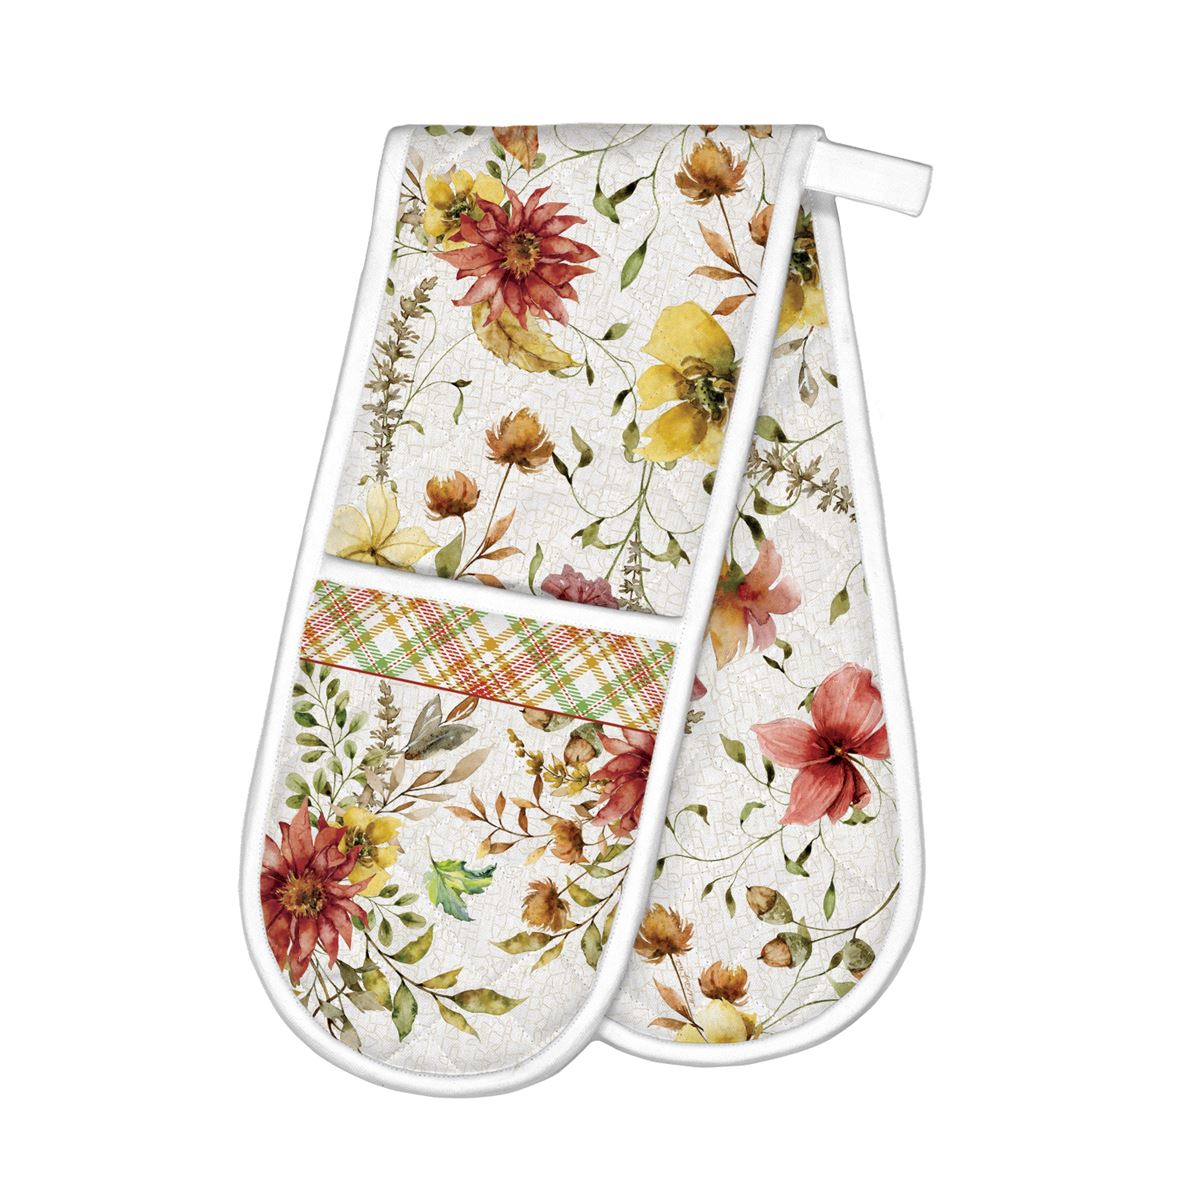 Fall Leaves & Flowers Double Oven Glove Stylish and Protective Kitchen Accessory